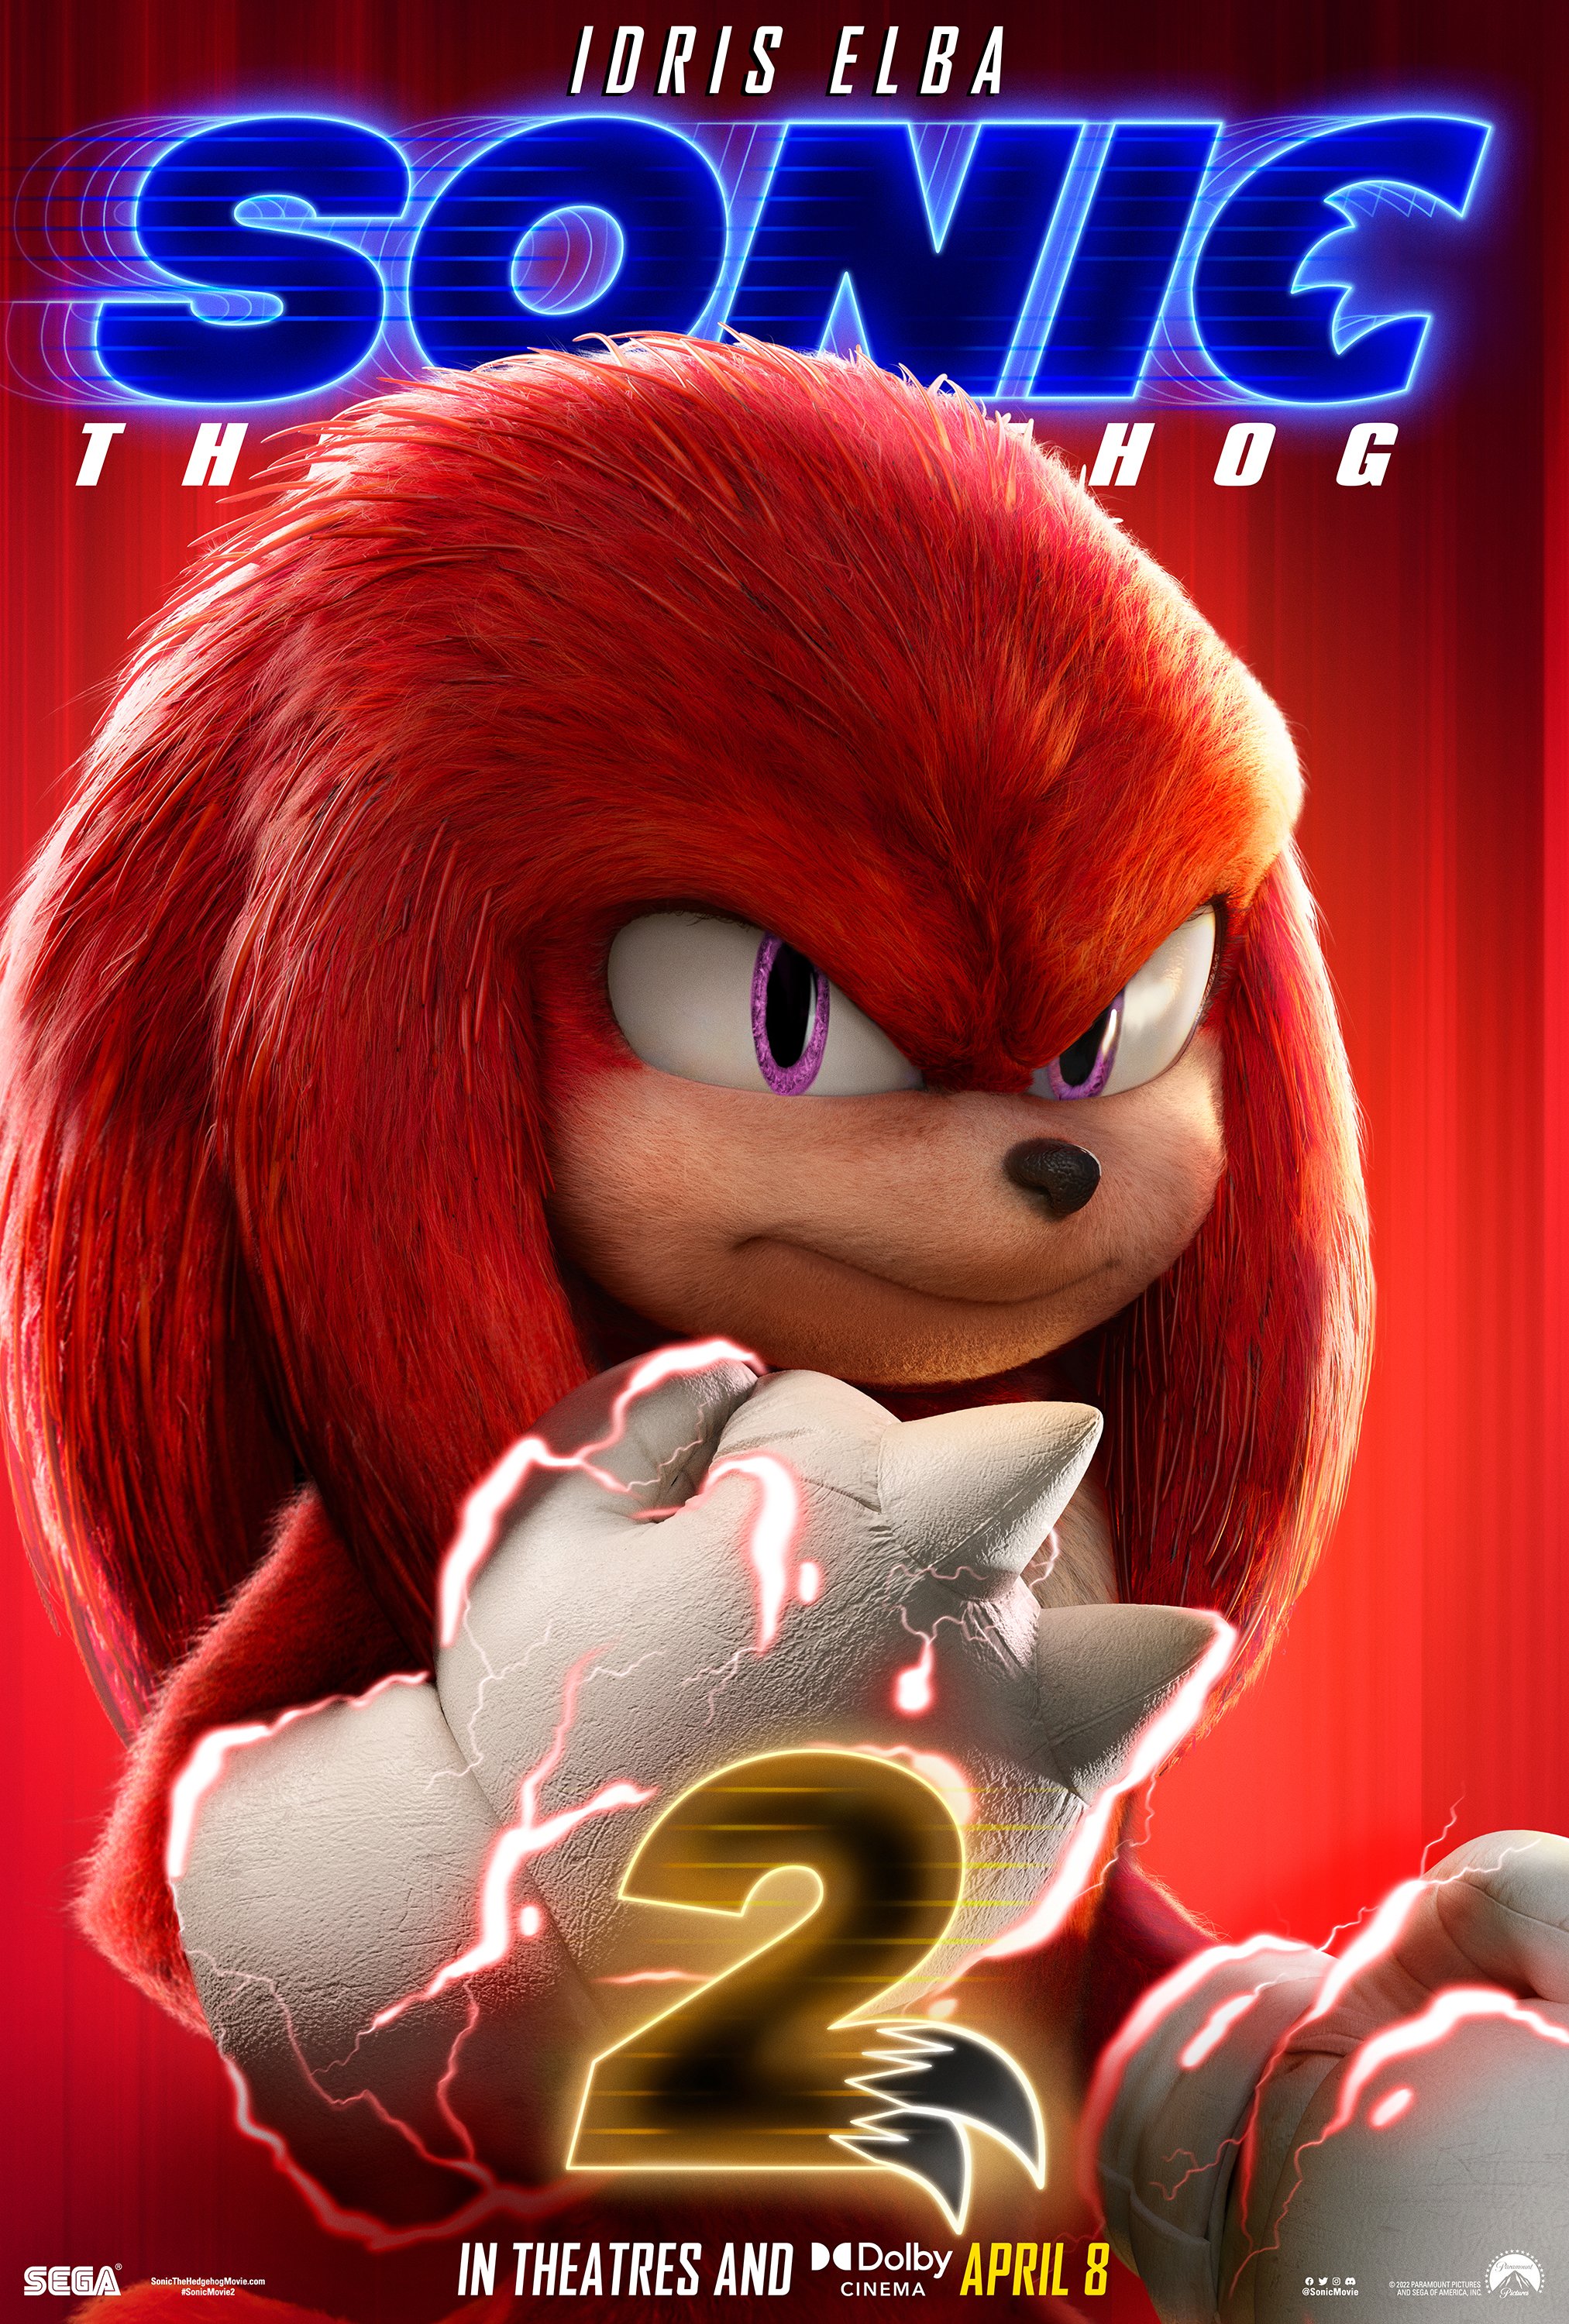 Tails' Channel, celebrating 15 years on X: Here's #SonicMovie2's Dolby  poster! #SonicNews  / X